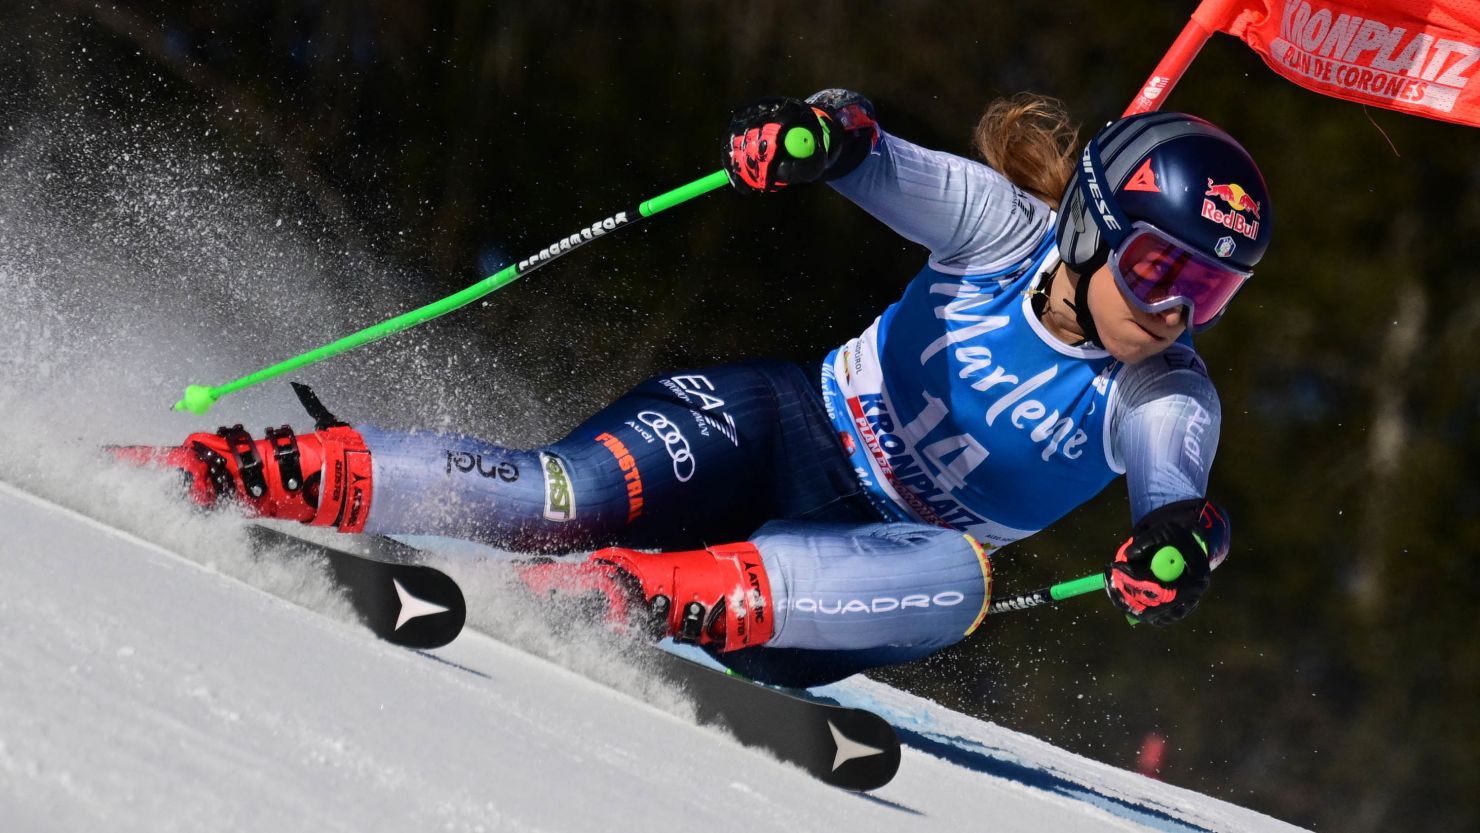 Italy's Sofia Goggia competes during a World Cup event on January 30.